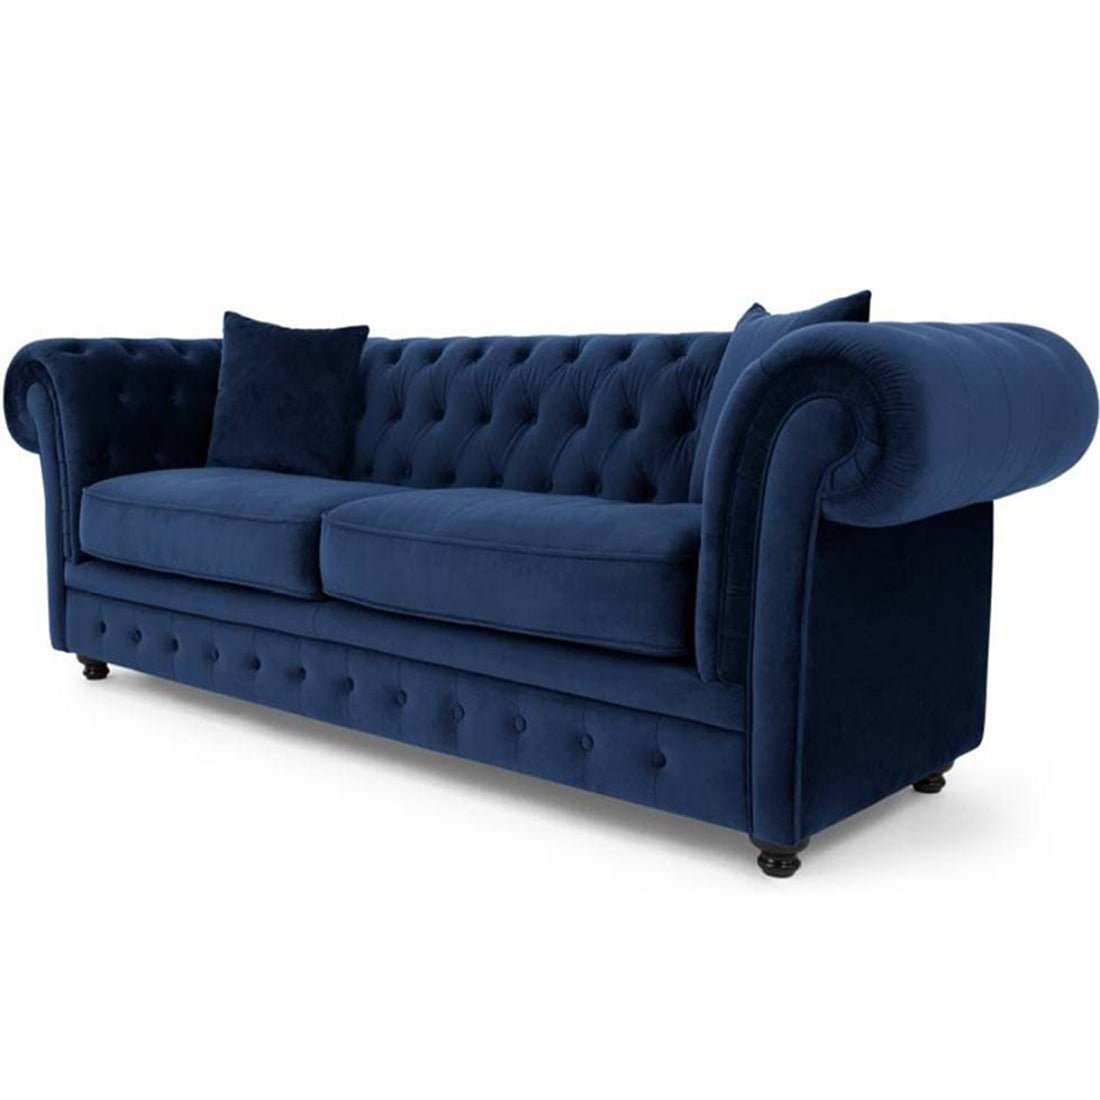 Torque India Morgan solid Wood 3 Seater Fabric Chesterfield Sofa for Living Room - Torque India